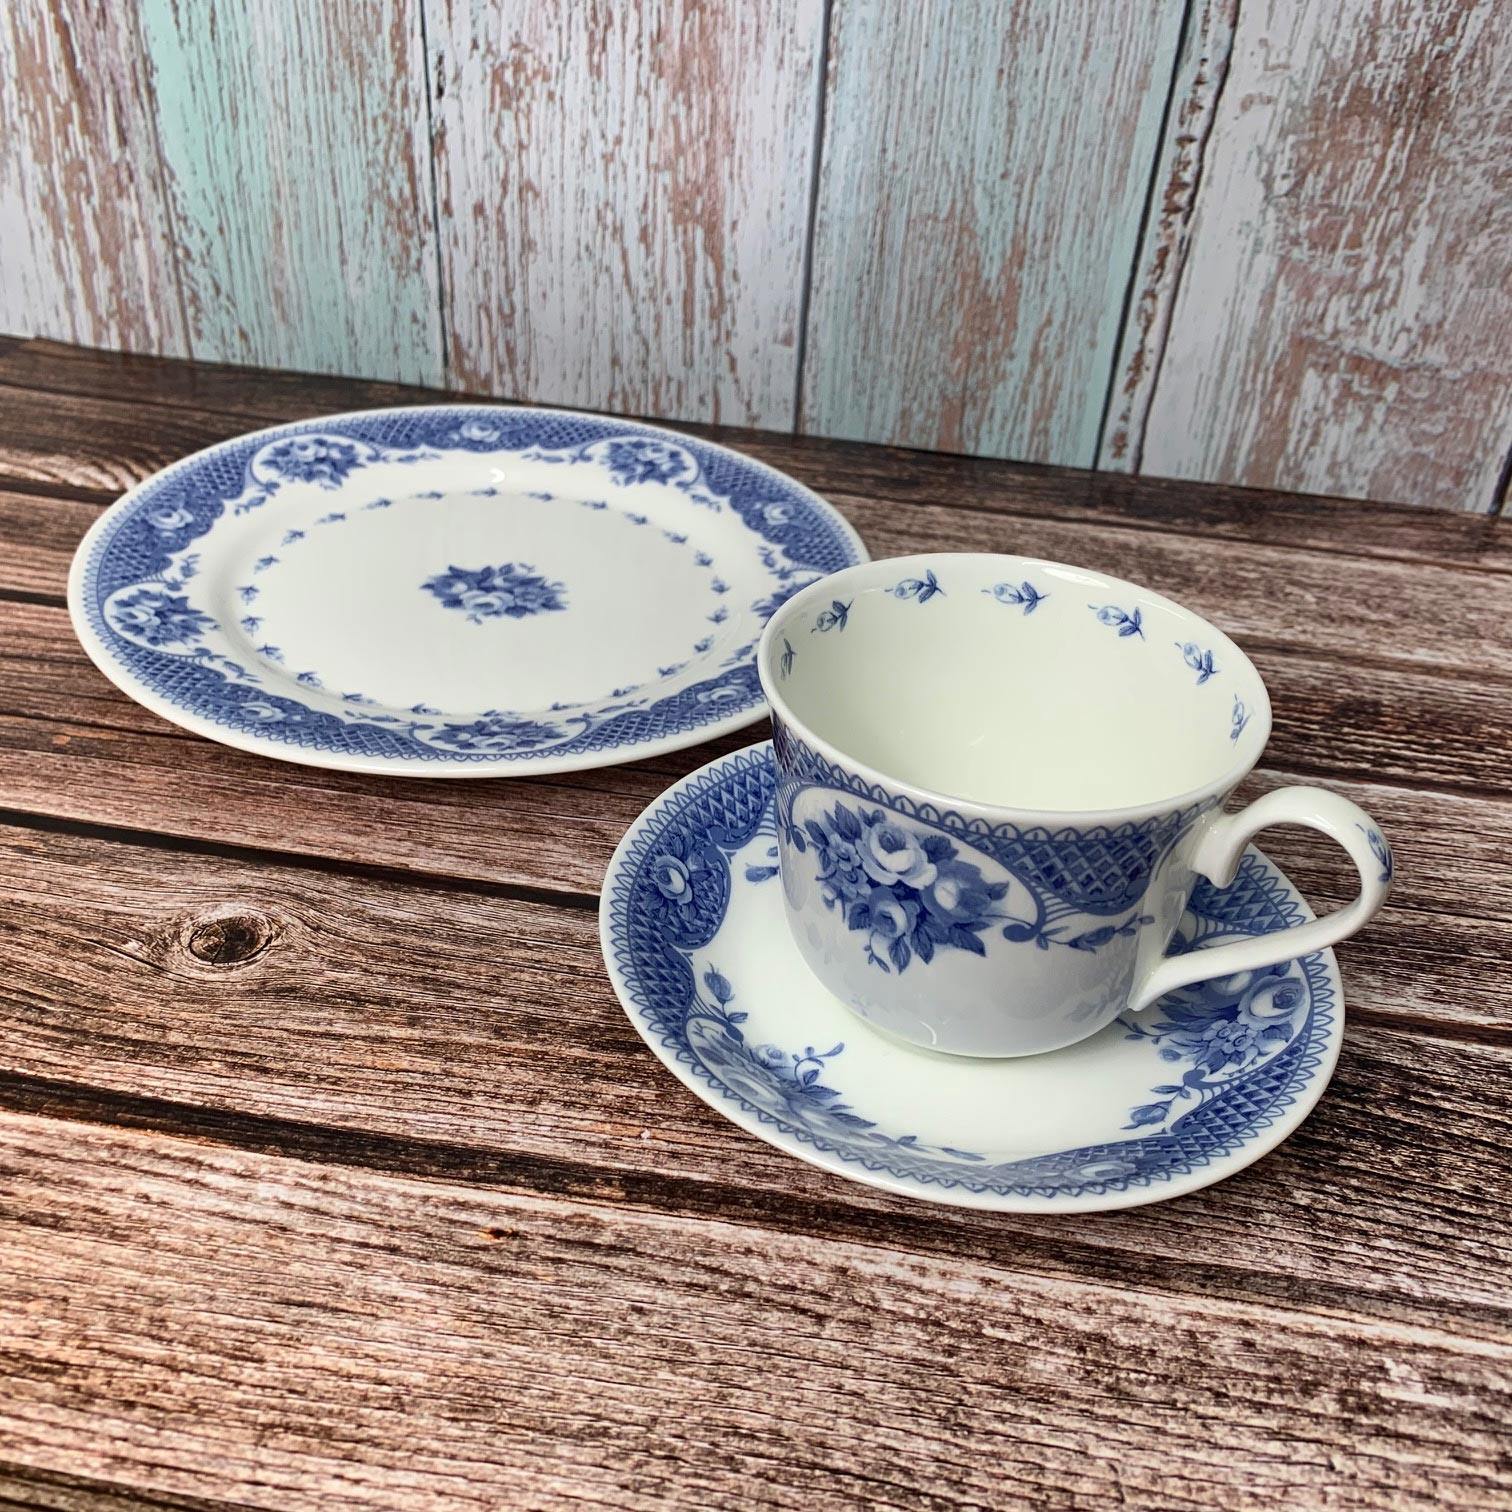 Exclusive Bone China Regency Teacup, Saucer and Plate Set - Jane Austen Netherfield Collection